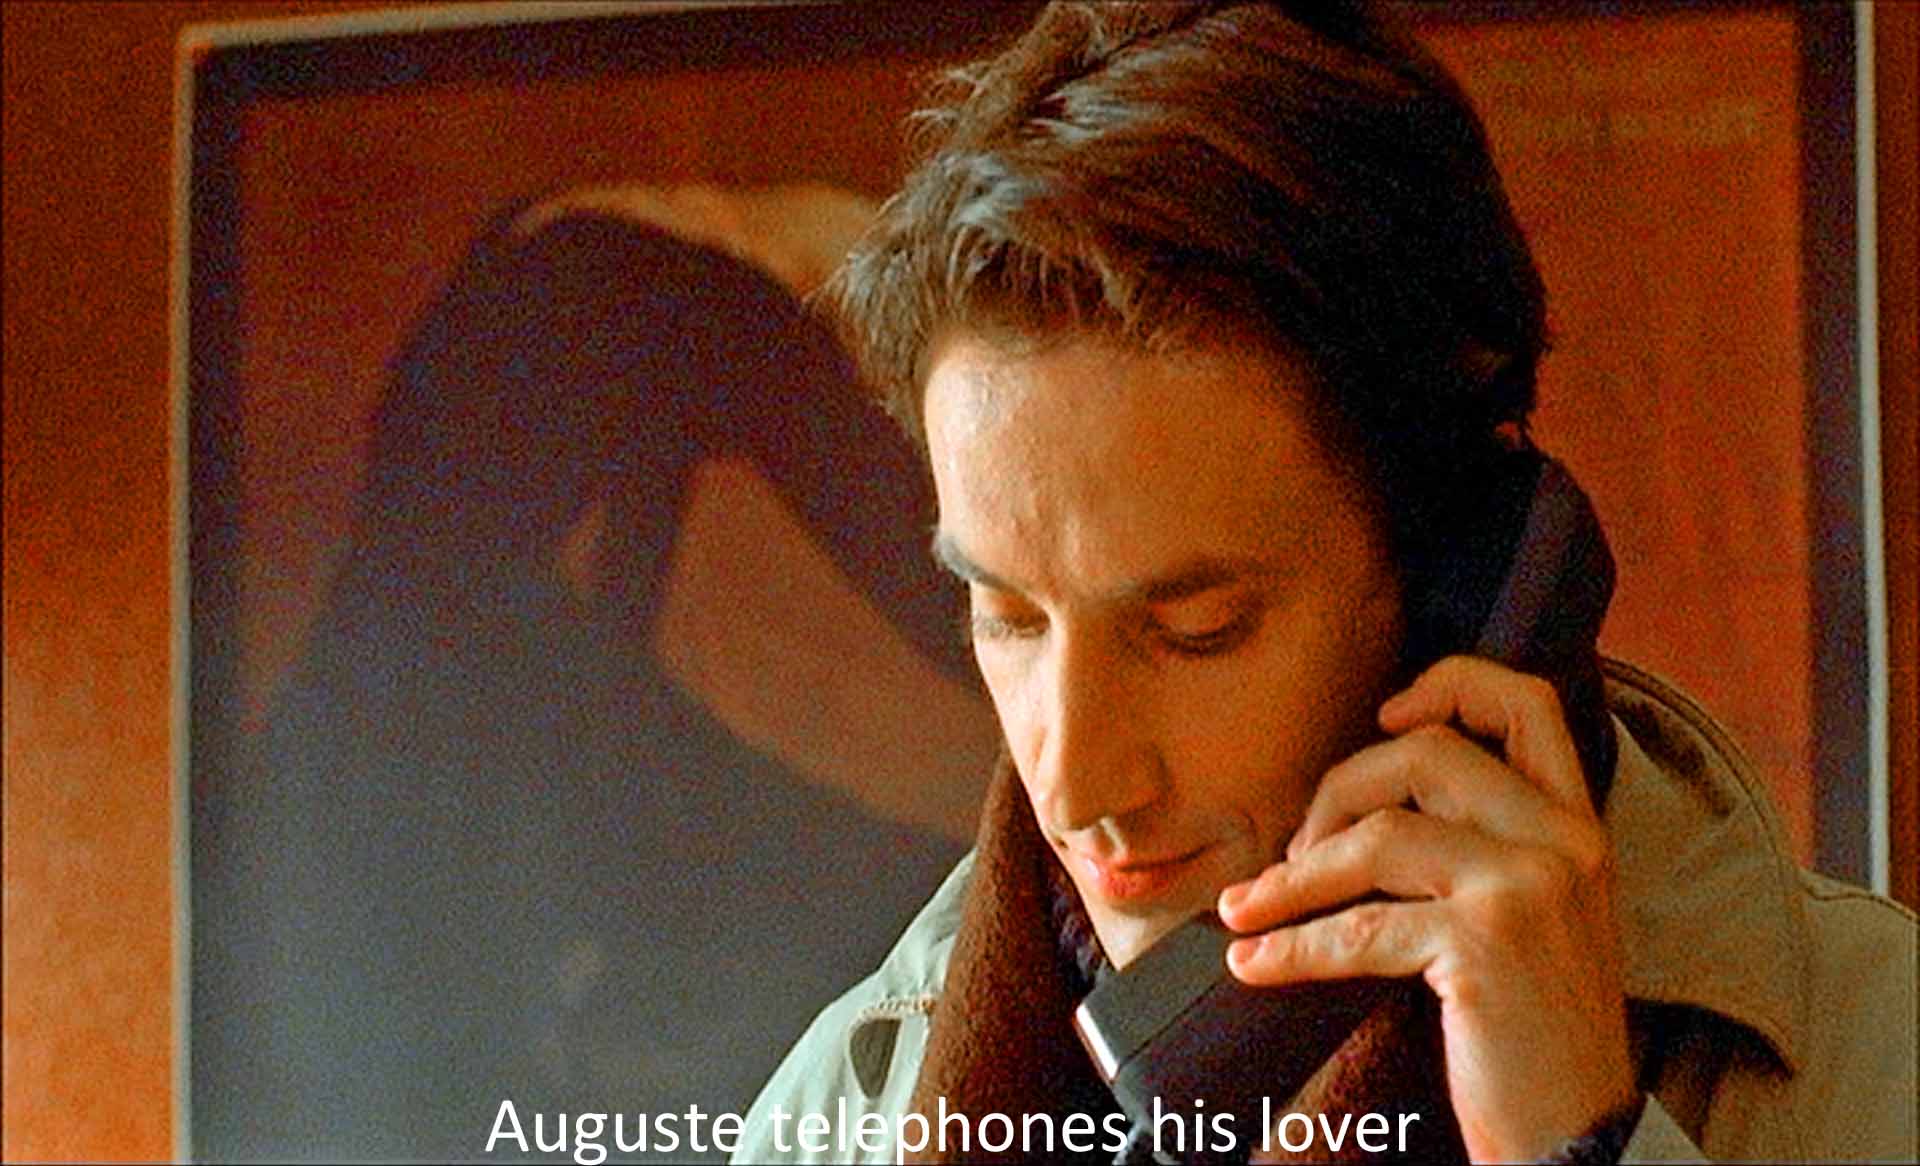 August telephones his lover